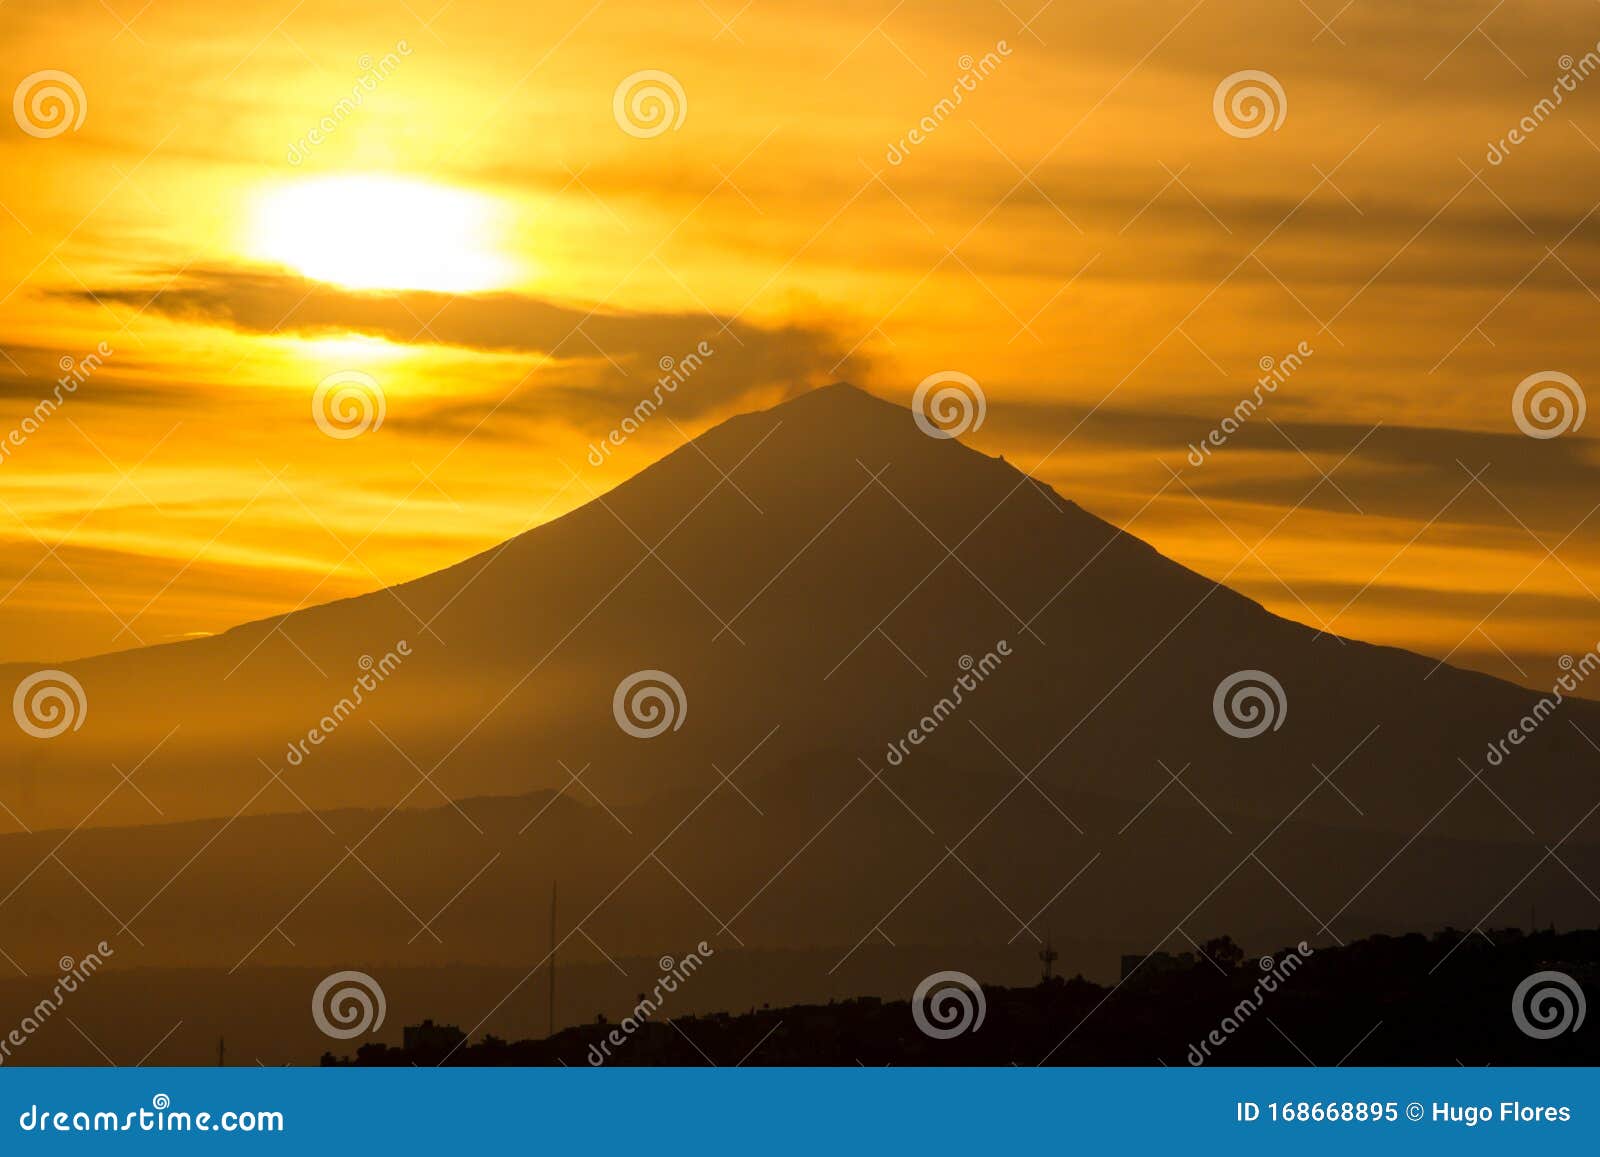 solar sphere above the volcano and with fumarole